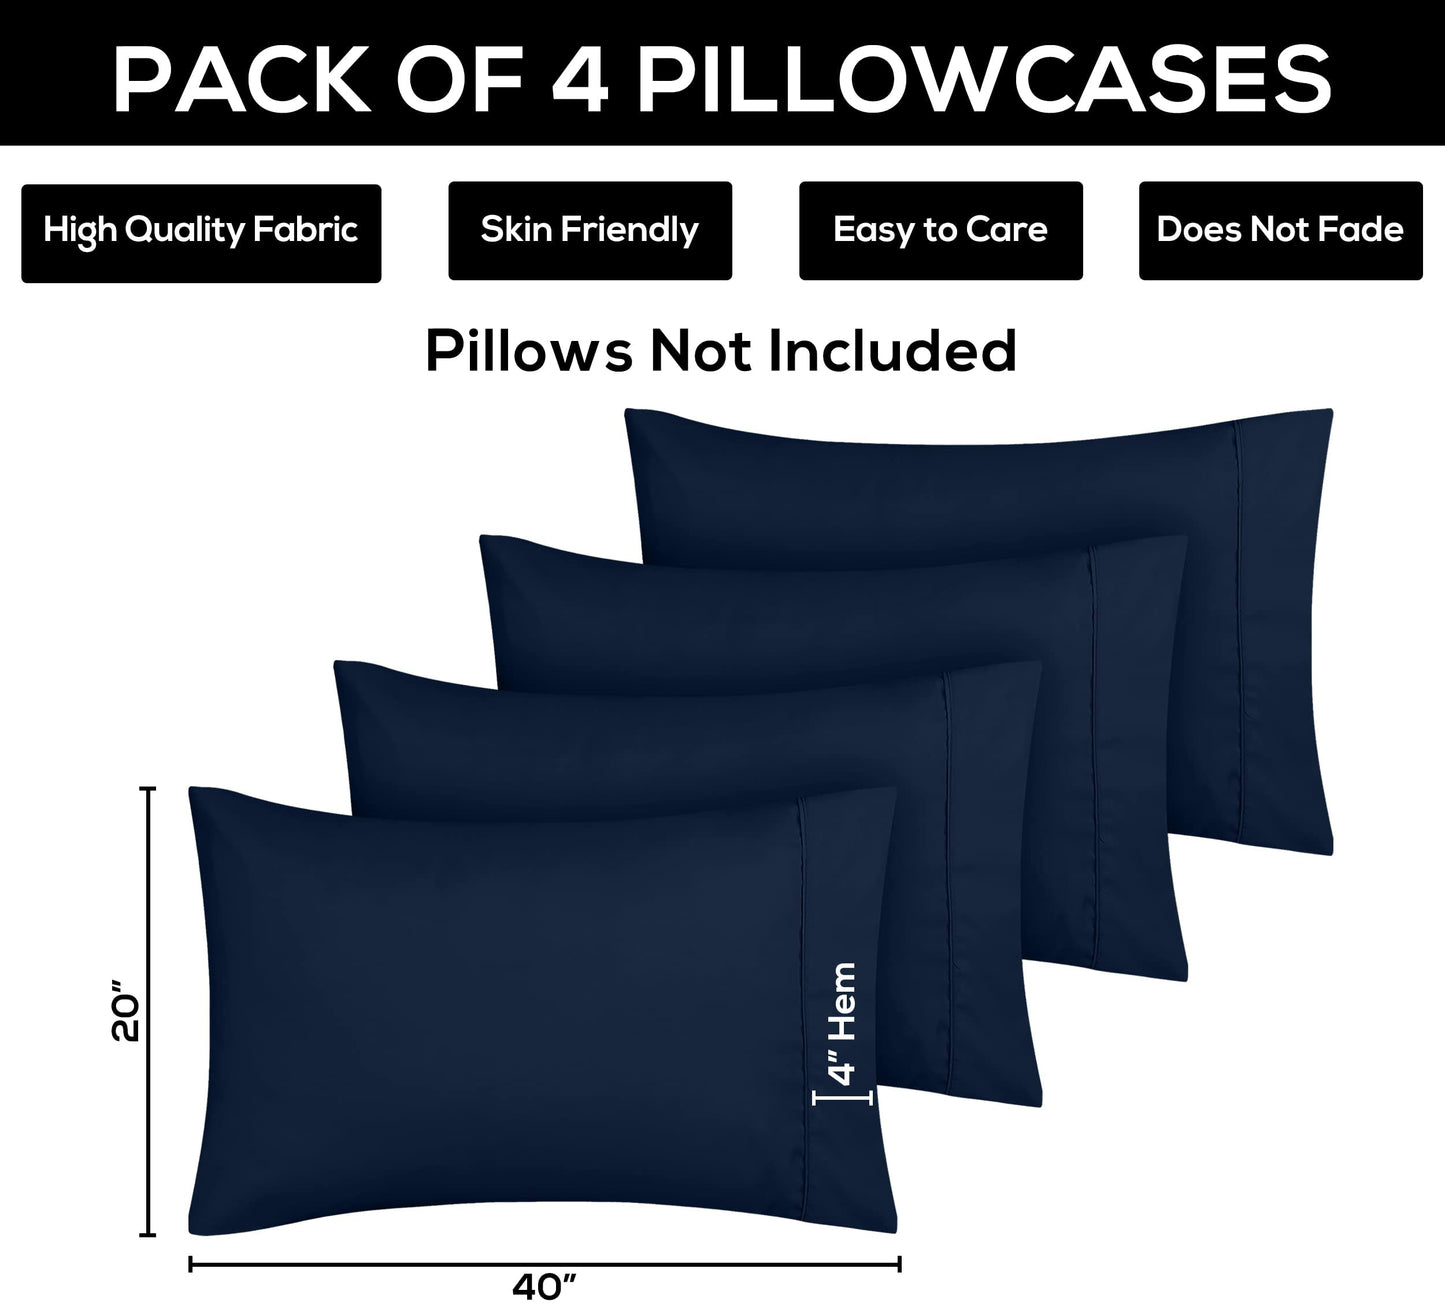 Utopia Bedding King Pillow Cases - 4 Pack - Envelope Closure - Soft Brushed Microfiber Fabric - Shrinkage and Fade Resistant Pillow Cases 20 X 40 (King, Navy)